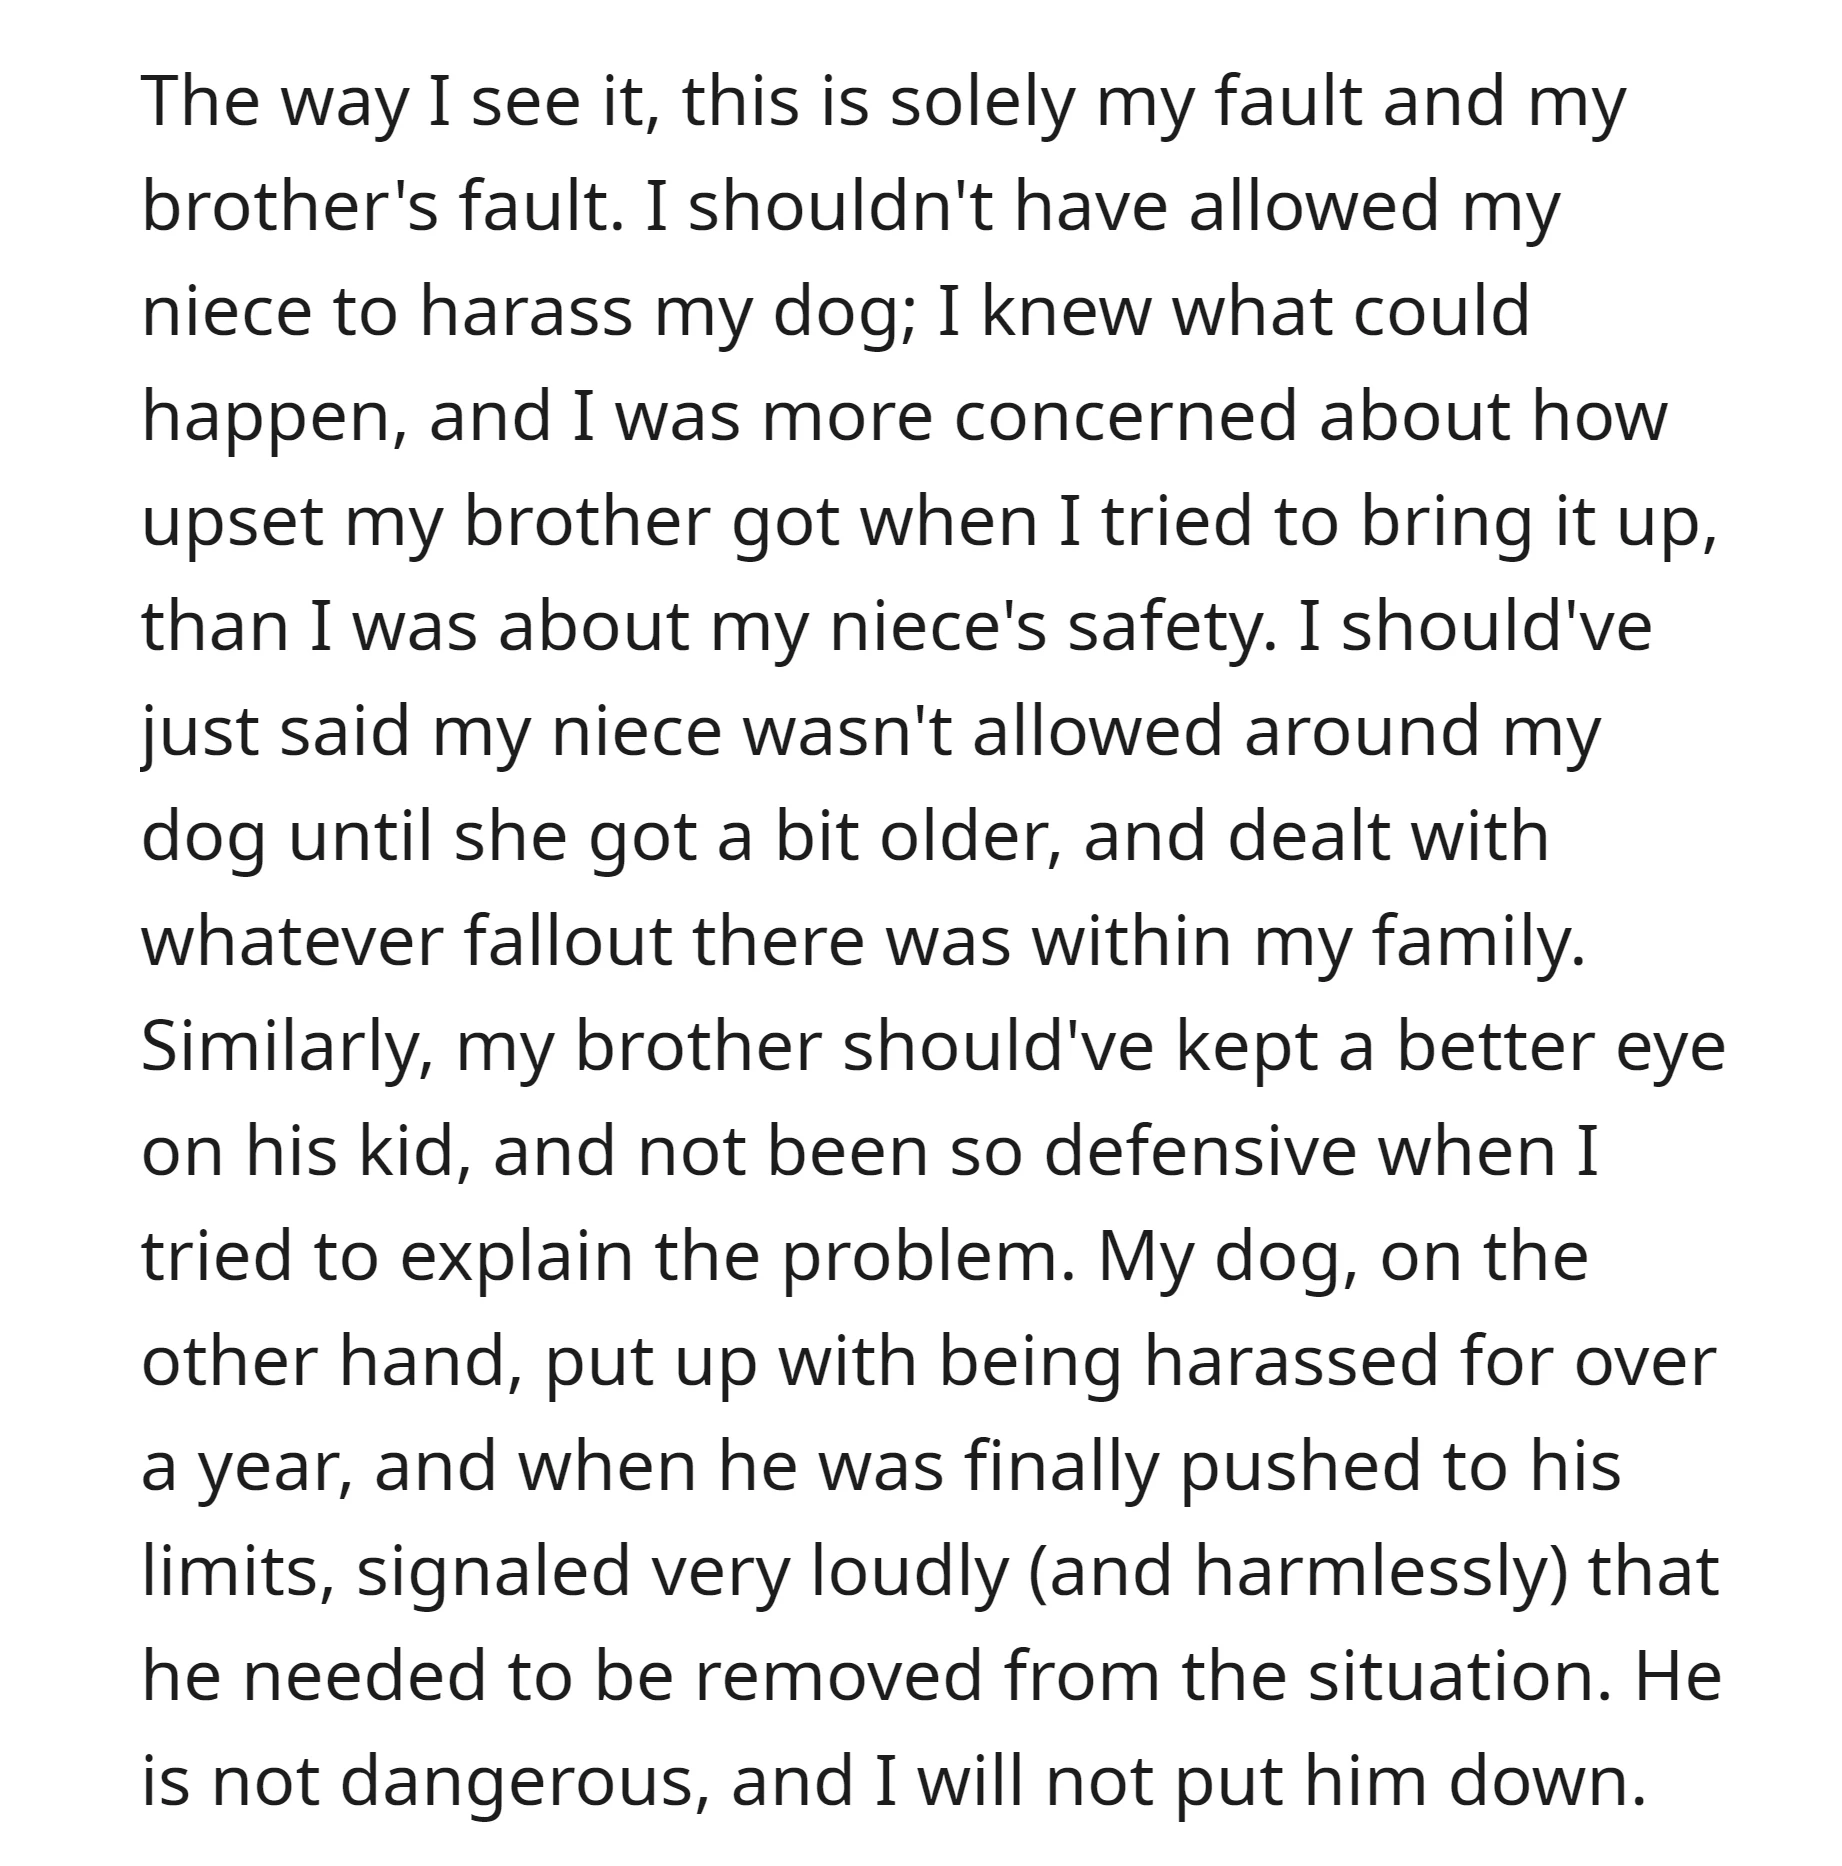 The OP took responsibility for the situation and firmly asserted that the dog was not dangerous